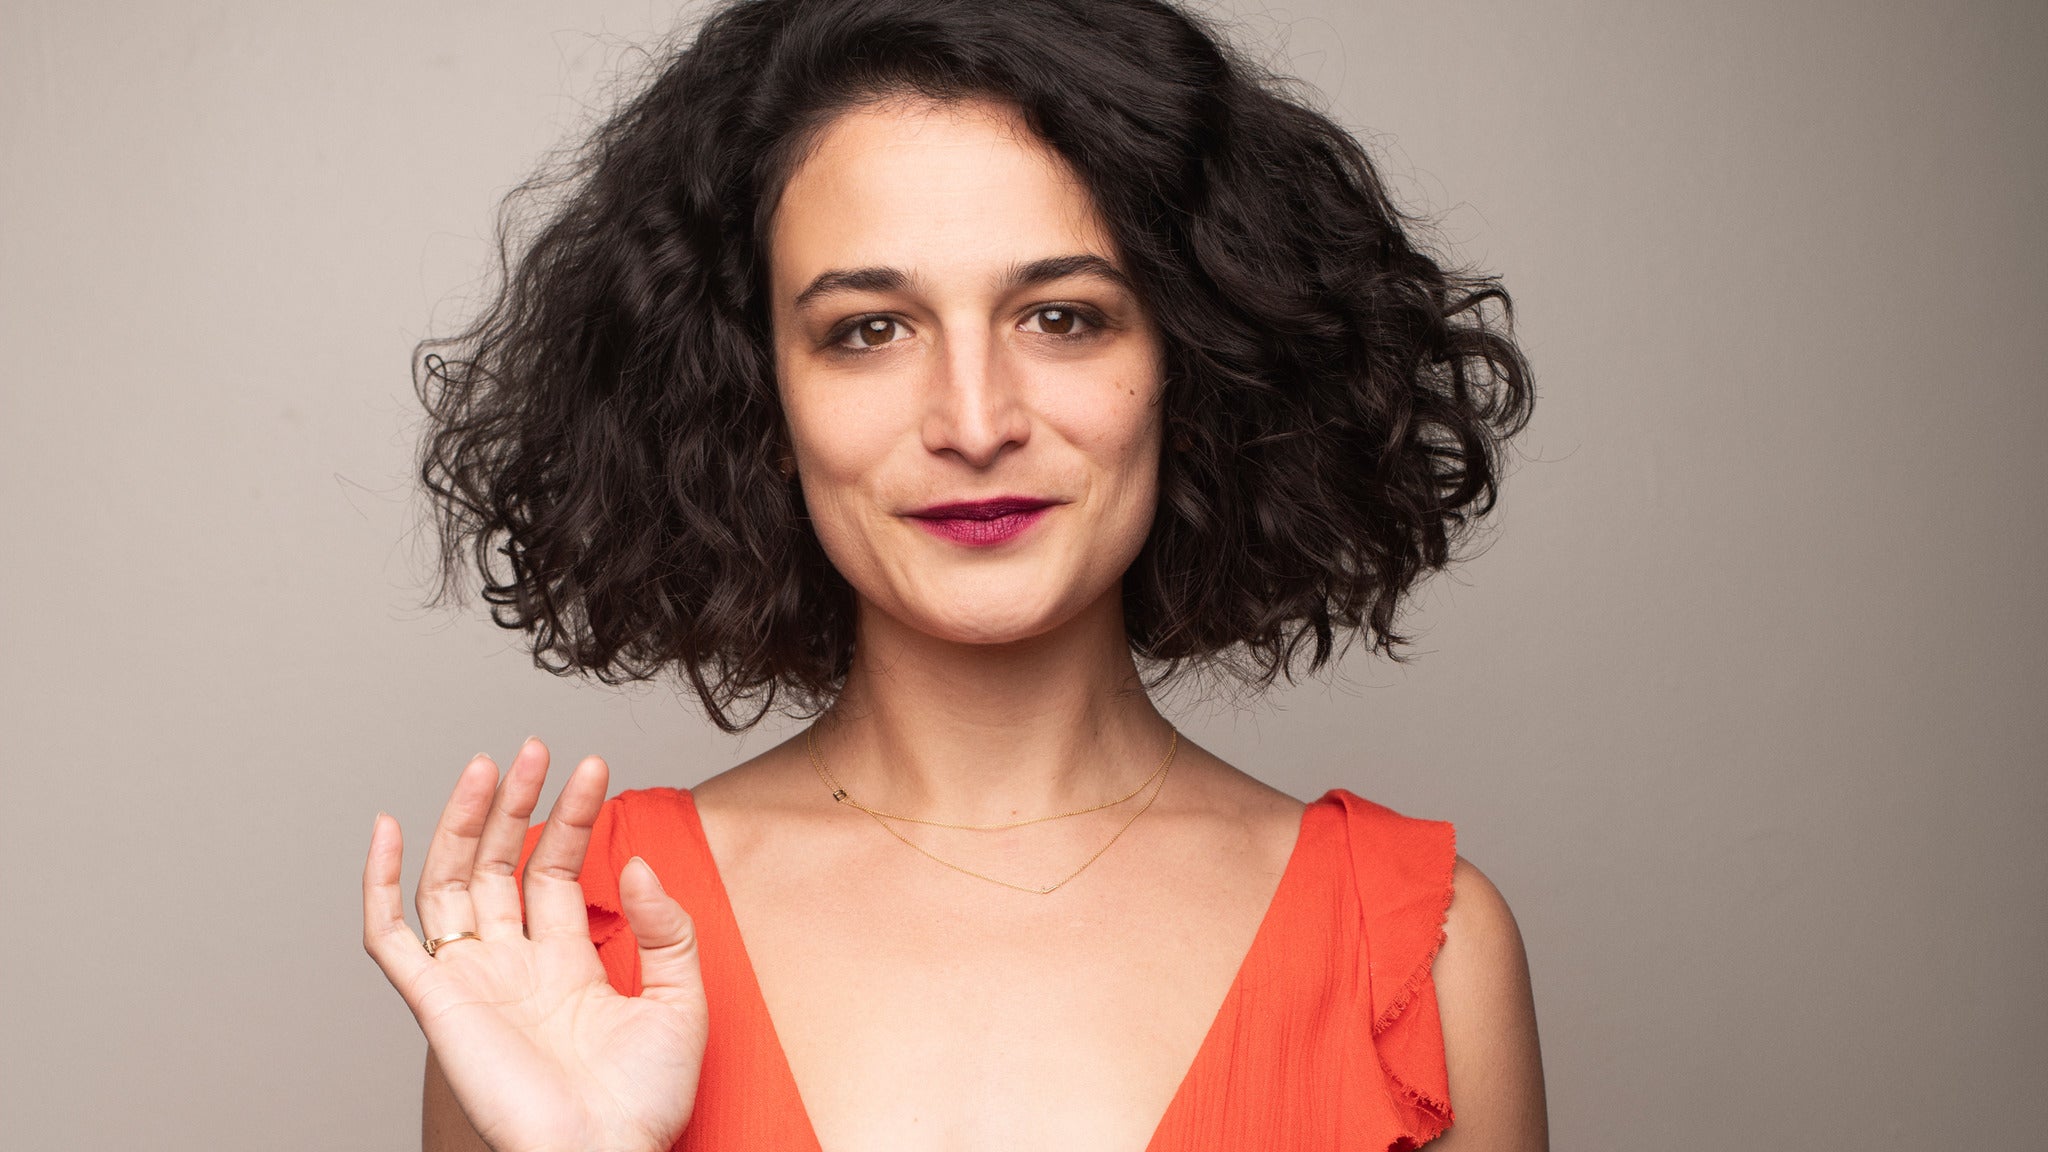 NY Comedy Festival Presents Jenny Slate presale password for early tickets in New York